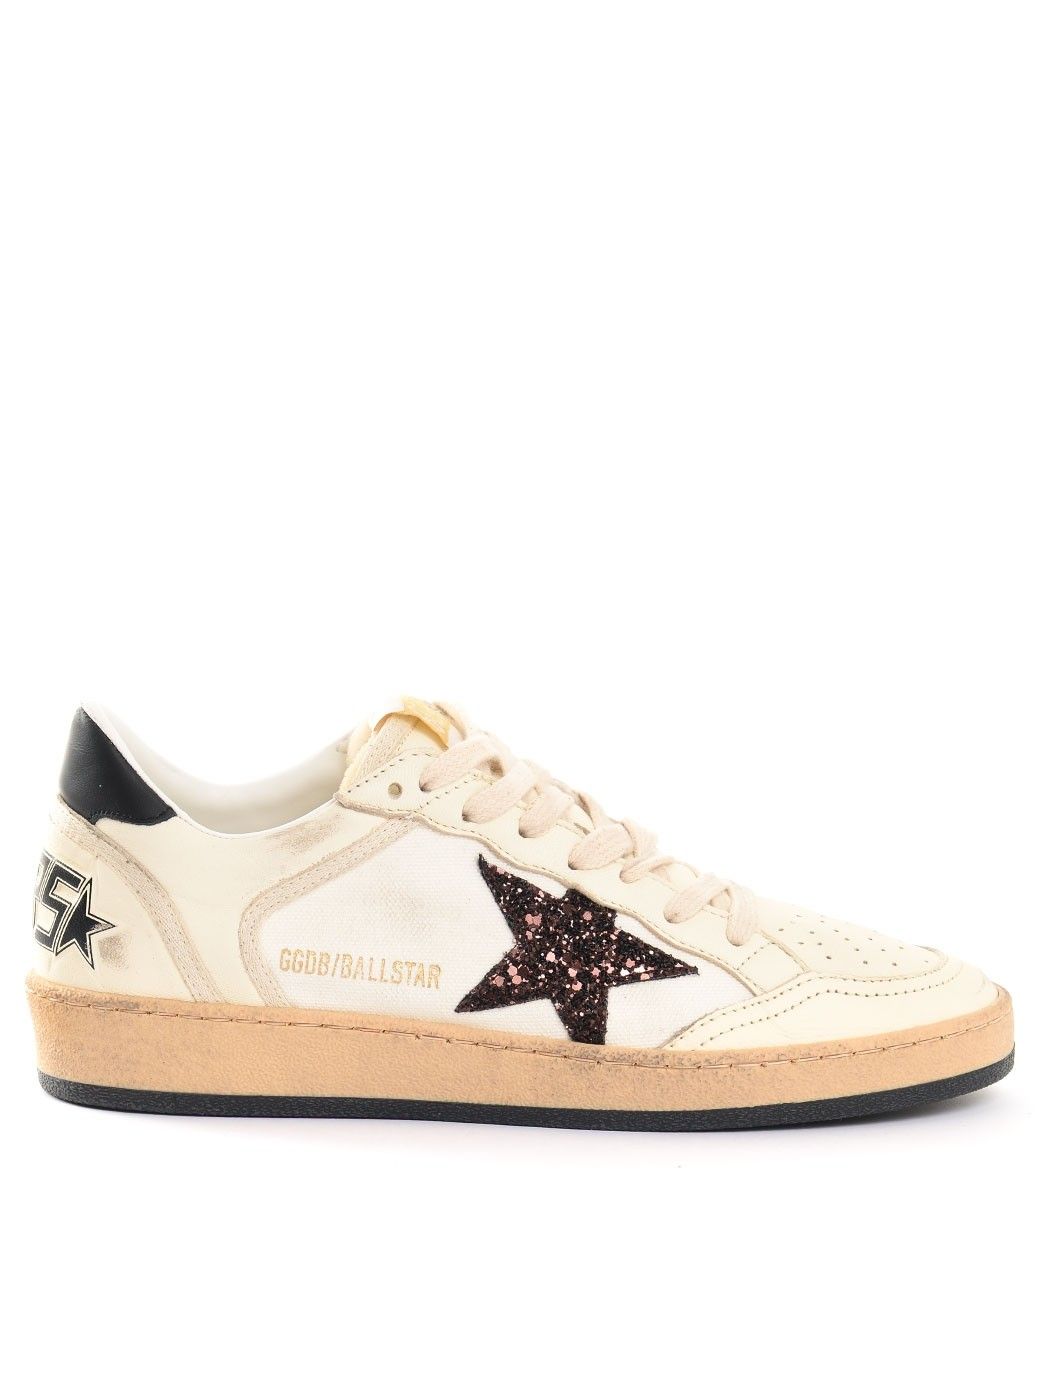  WOMAN SHOES,MARNI SHOES,GOLDEN GOOSE SNEAKERS,GOLDEN GOOSE SHOES,GIVENCHY SHOES,GIVENCHY SANDALS,MARNI SNEAKERS  GOLDEN GOOSE GWF00327